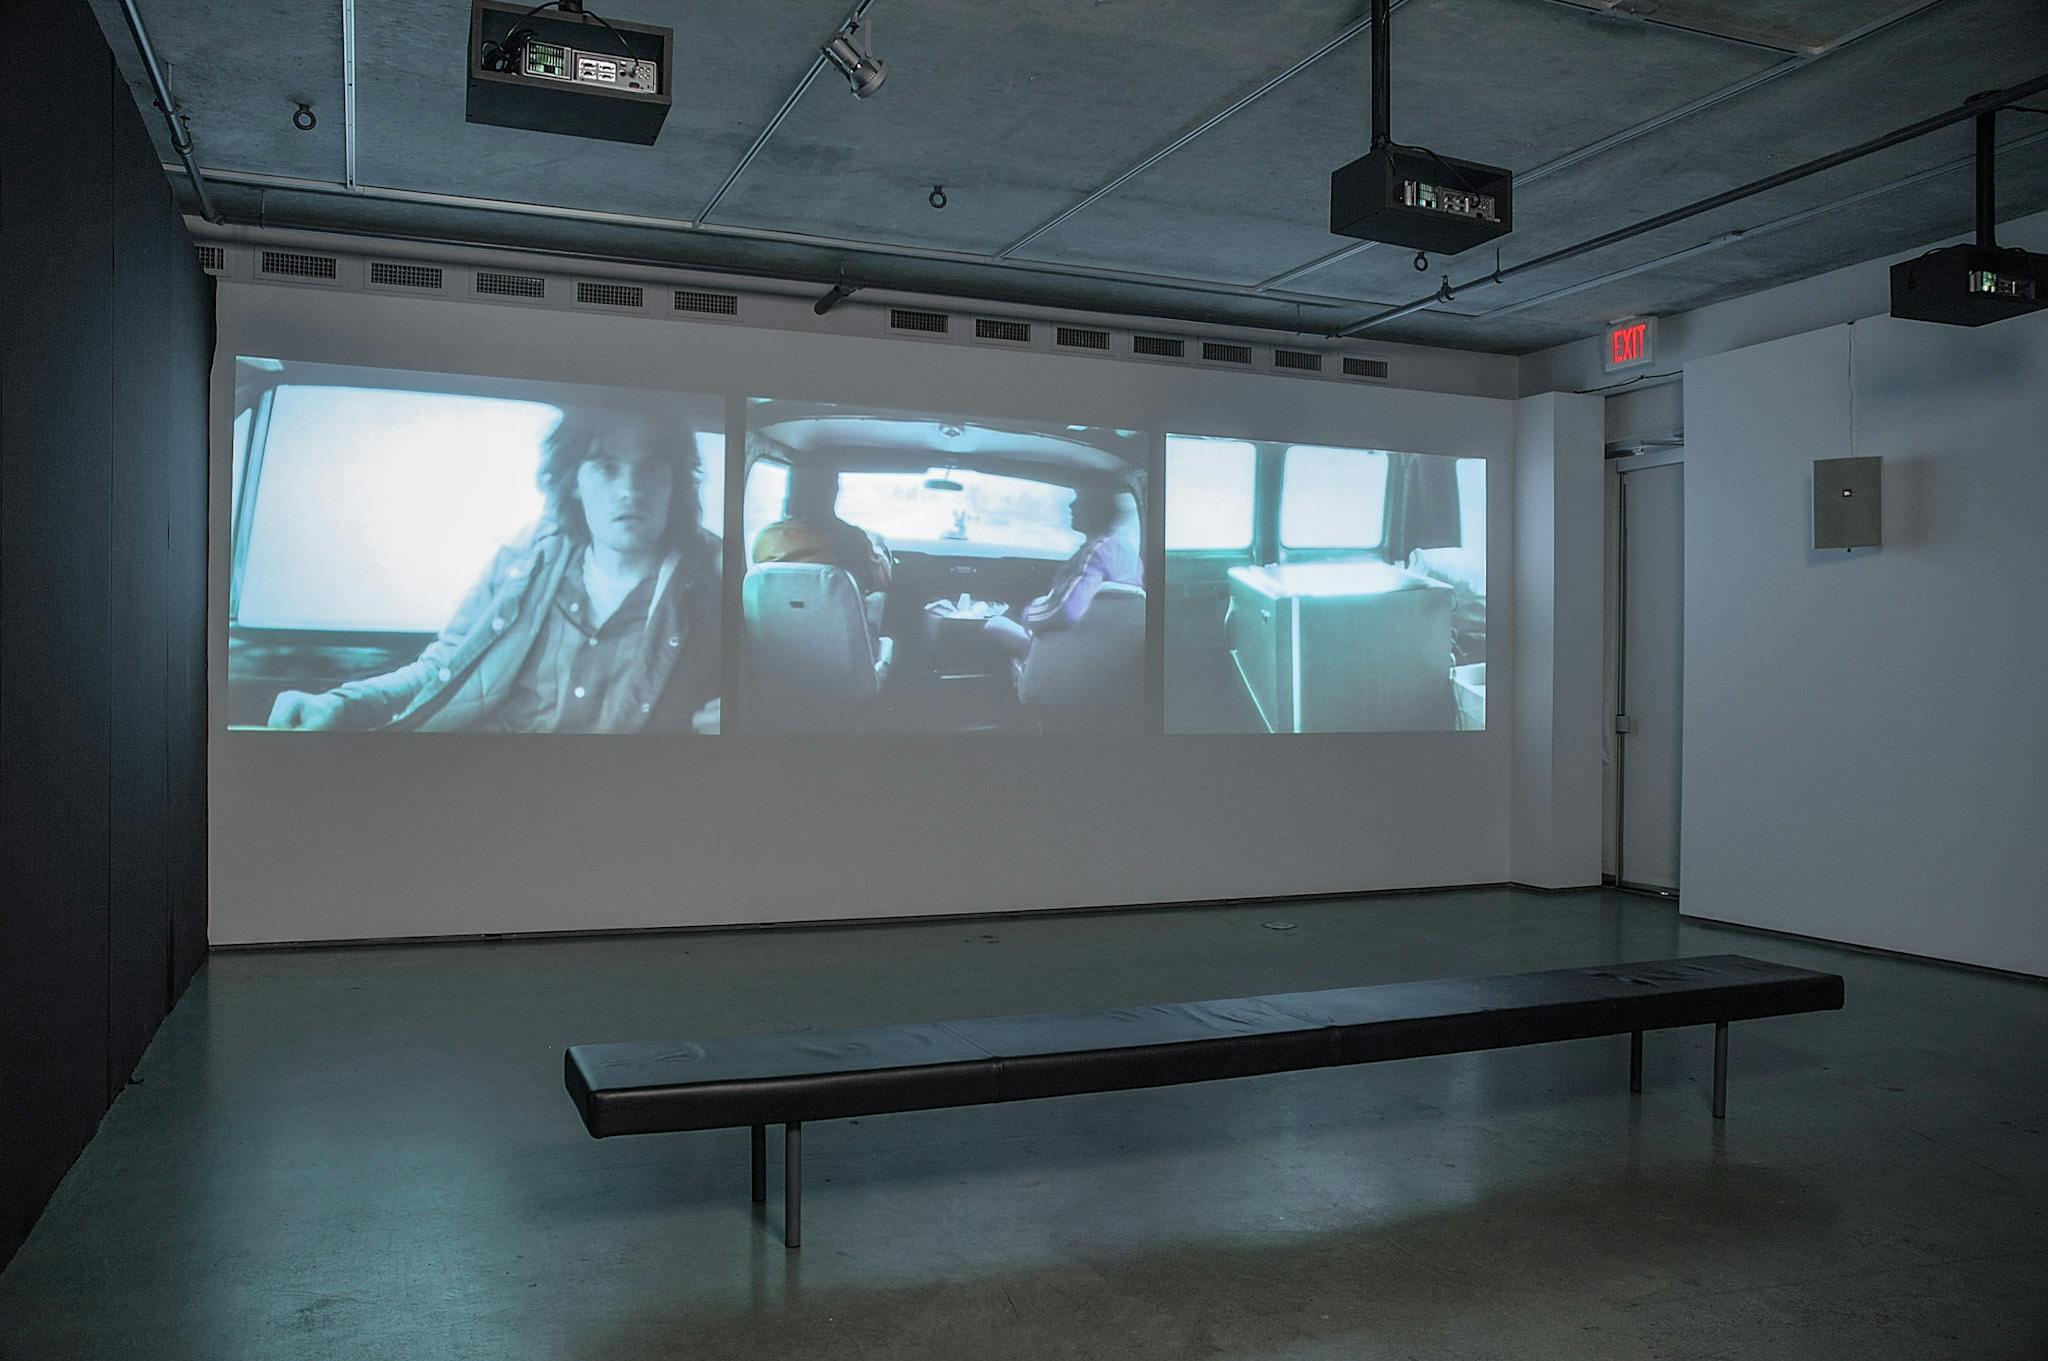 An installation image of three-channel video work projected on a gallery wall. The videos show people and objects in a car from different angles. The middle video shows an image of two people in front seats.